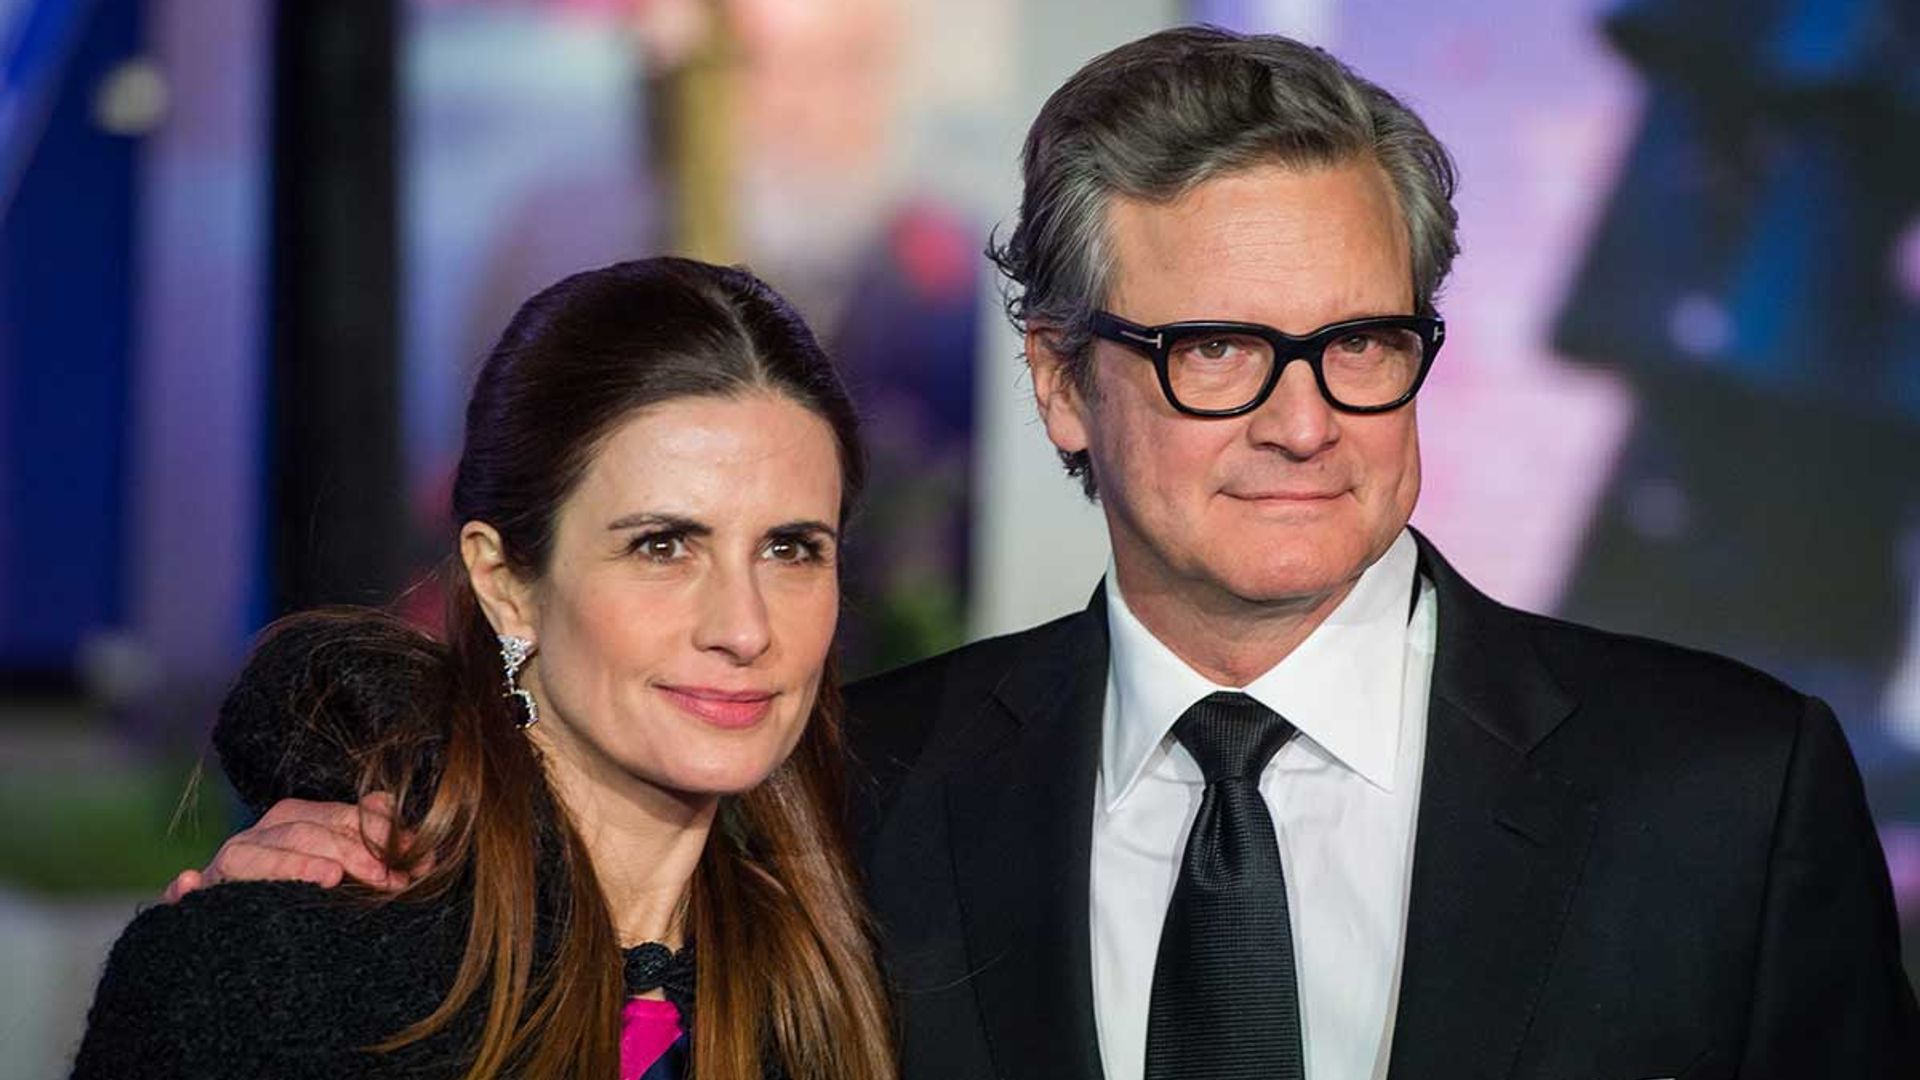 Colin Firth and Livia Giuggioli why they decided to split after 22